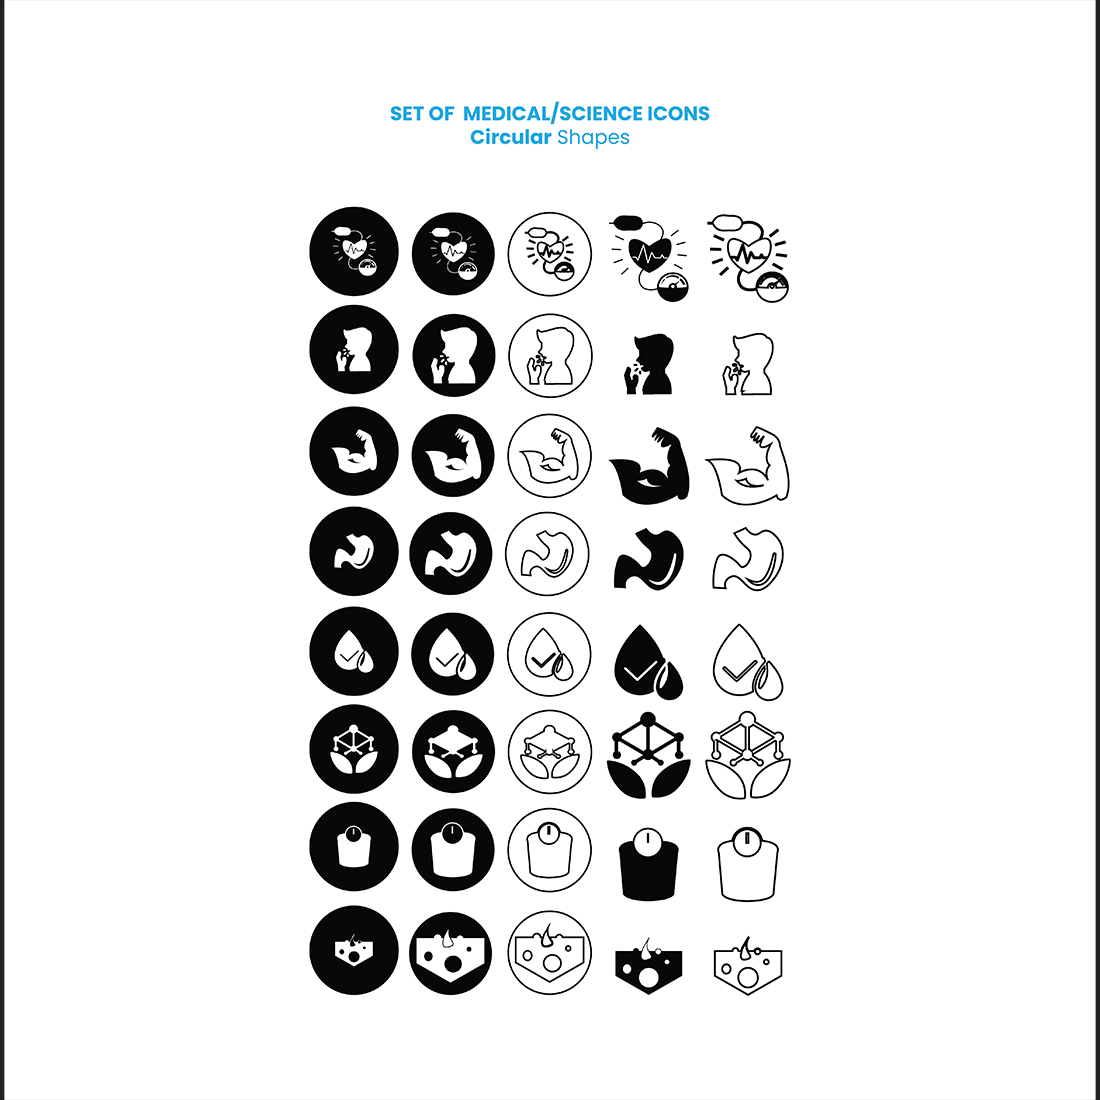 35 Science and Health Icons Bundle, black icons circular shape.